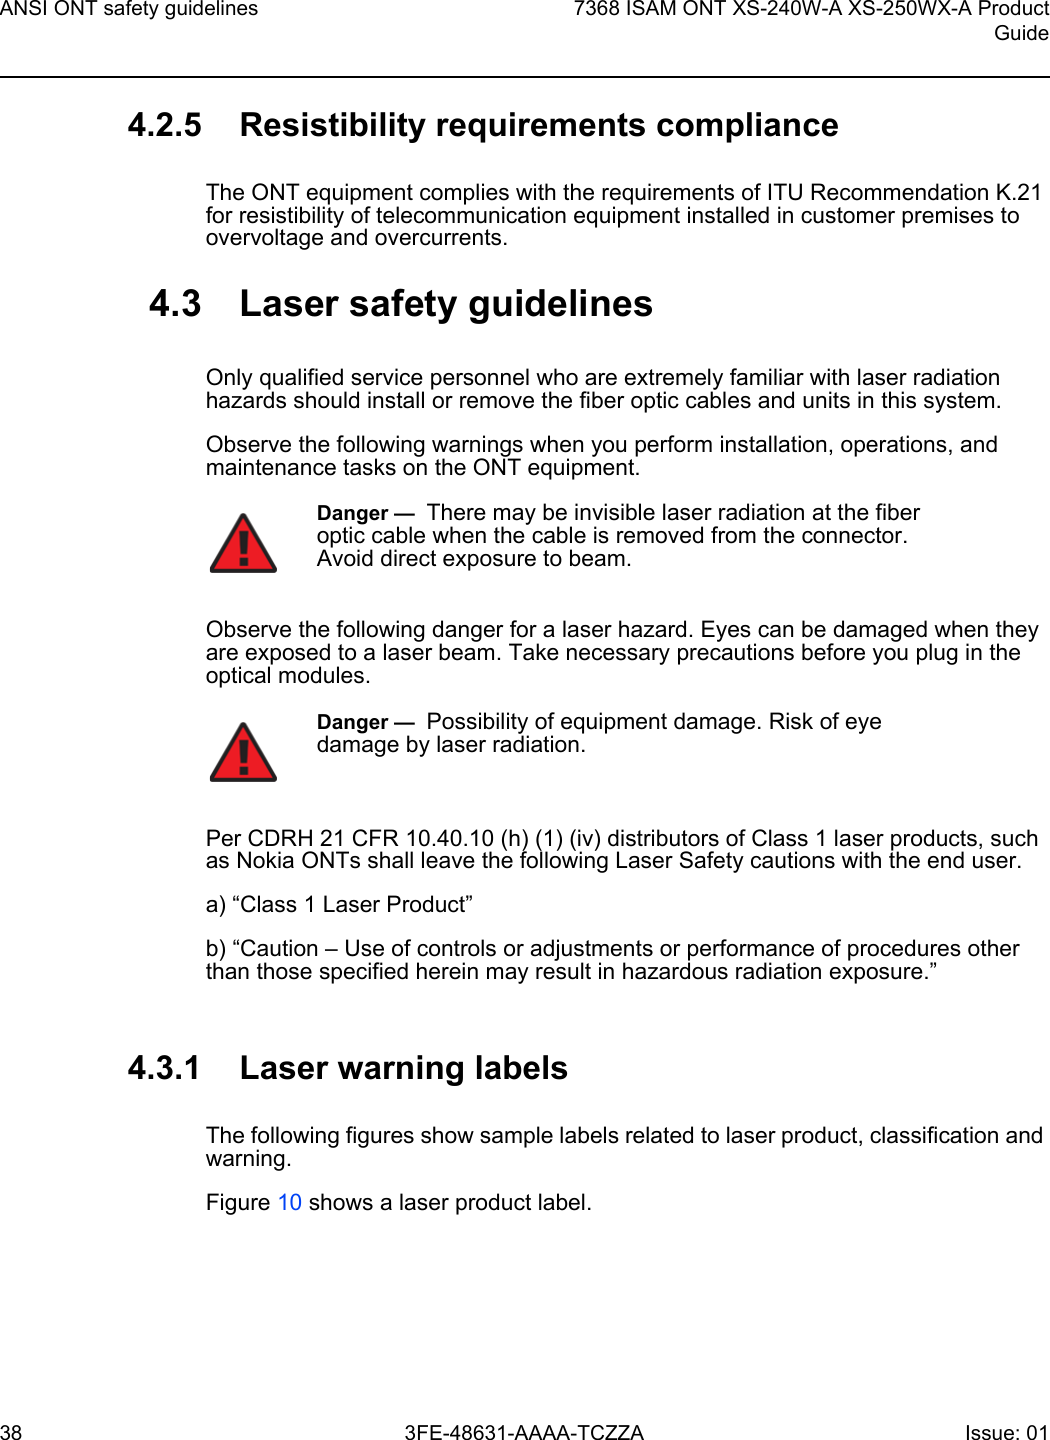 ANSI ONT safety guidelines387368 ISAM ONT XS-240W-A XS-250WX-A ProductGuide3FE-48631-AAAA-TCZZA Issue: 01 4.2.5 Resistibility requirements complianceThe ONT equipment complies with the requirements of ITU Recommendation K.21 for resistibility of telecommunication equipment installed in customer premises to overvoltage and overcurrents.4.3 Laser safety guidelinesOnly qualified service personnel who are extremely familiar with laser radiation hazards should install or remove the fiber optic cables and units in this system.Observe the following warnings when you perform installation, operations, and maintenance tasks on the ONT equipment.Observe the following danger for a laser hazard. Eyes can be damaged when they are exposed to a laser beam. Take necessary precautions before you plug in the optical modules.Per CDRH 21 CFR 10.40.10 (h) (1) (iv) distributors of Class 1 laser products, such as Nokia ONTs shall leave the following Laser Safety cautions with the end user.a) “Class 1 Laser Product”b) “Caution – Use of controls or adjustments or performance of procedures other than those specified herein may result in hazardous radiation exposure.”4.3.1 Laser warning labelsThe following figures show sample labels related to laser product, classification and warning. Figure 10 shows a laser product label.Danger —  There may be invisible laser radiation at the fiber optic cable when the cable is removed from the connector. Avoid direct exposure to beam.Danger —  Possibility of equipment damage. Risk of eye damage by laser radiation.